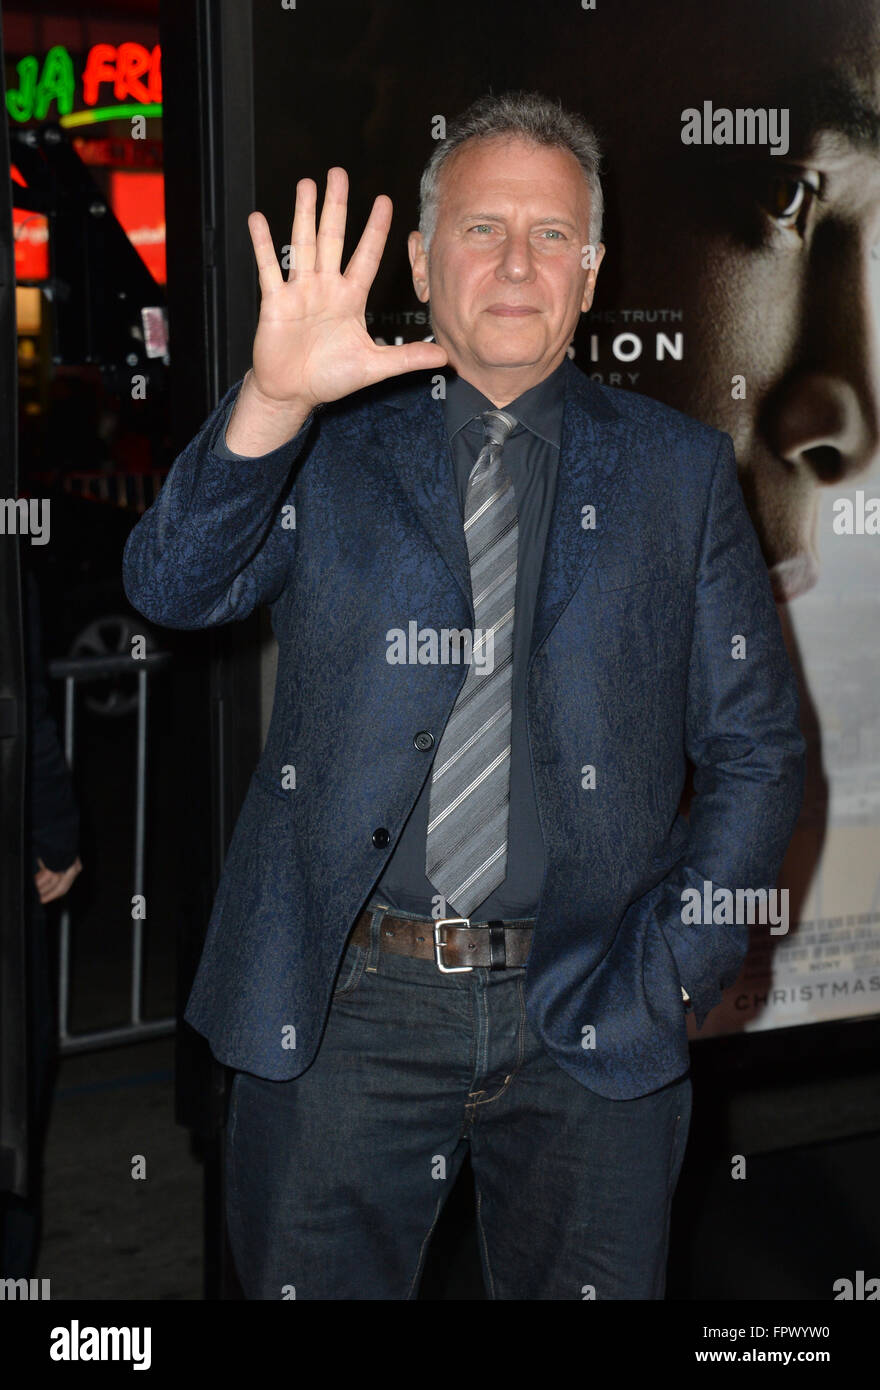 LOS ANGELES, CA - NOVEMBER 10, 2015: Actor Paul Reiser at the premiere of his movie 'Concussion', part of the AFI FEST 2015, at the TCL Chinese Theatre, Hollywood. Stock Photo